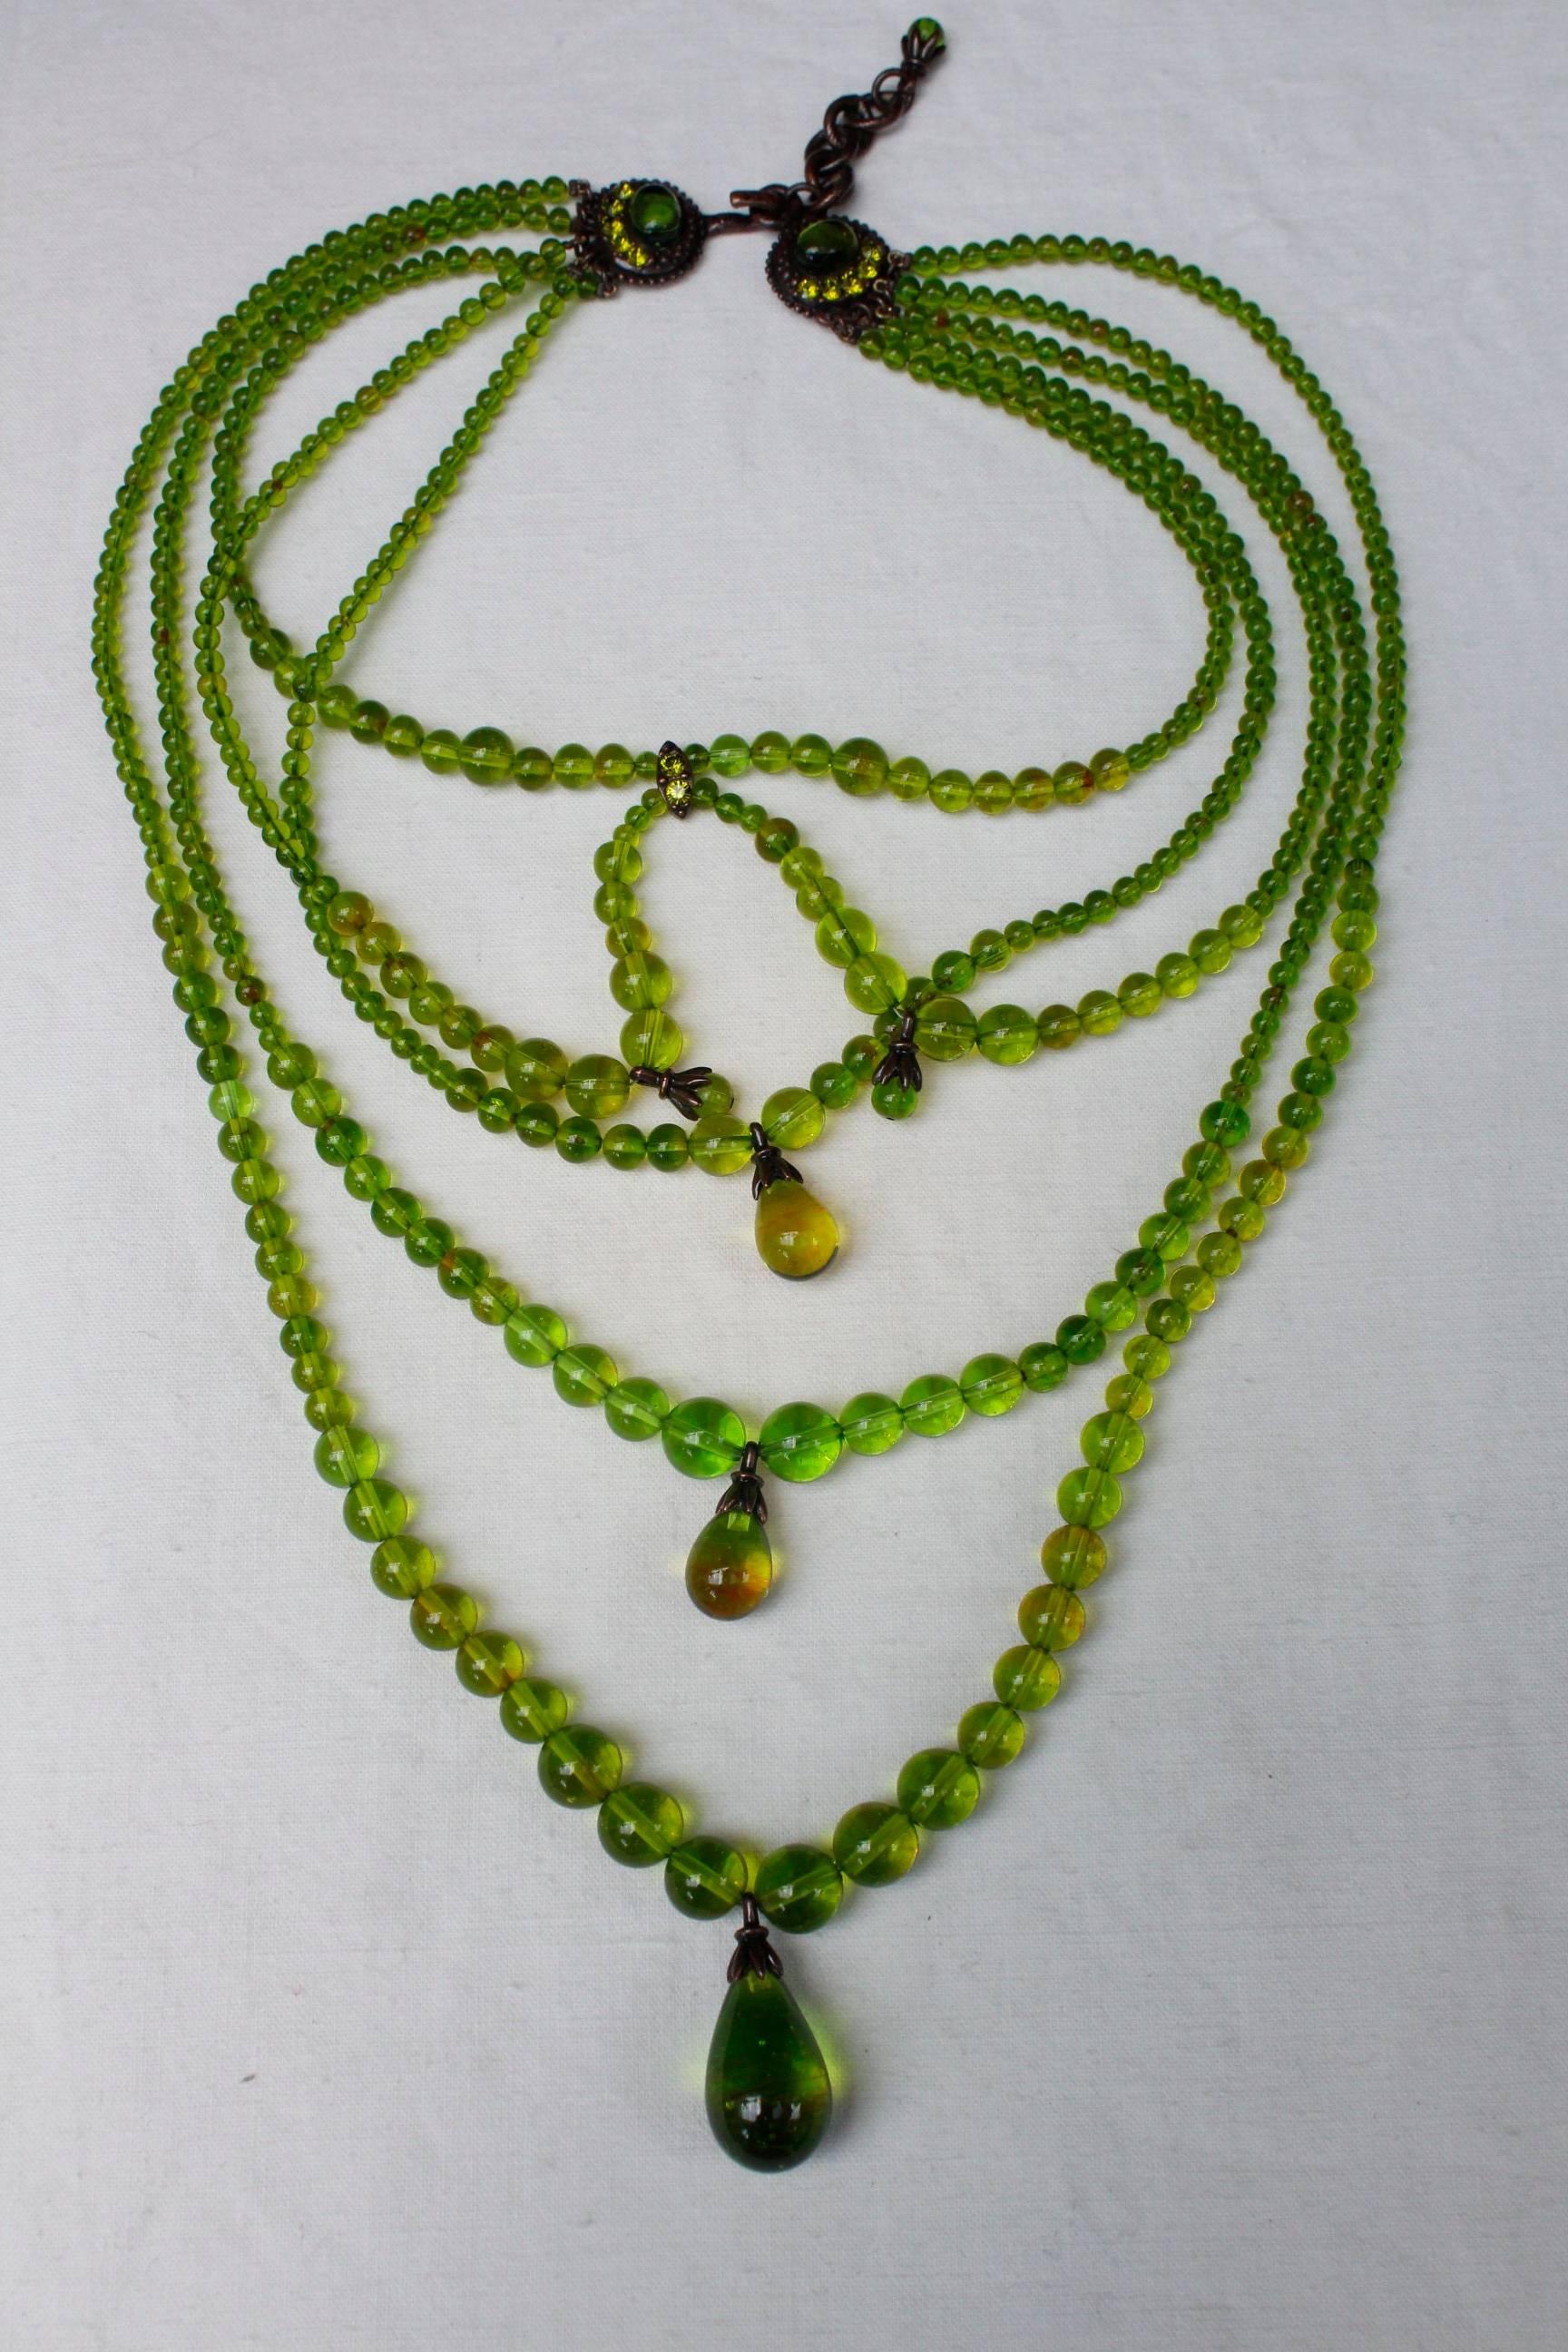 Women's Late 1990s Christian Dior by Galliano Green Massai Necklace